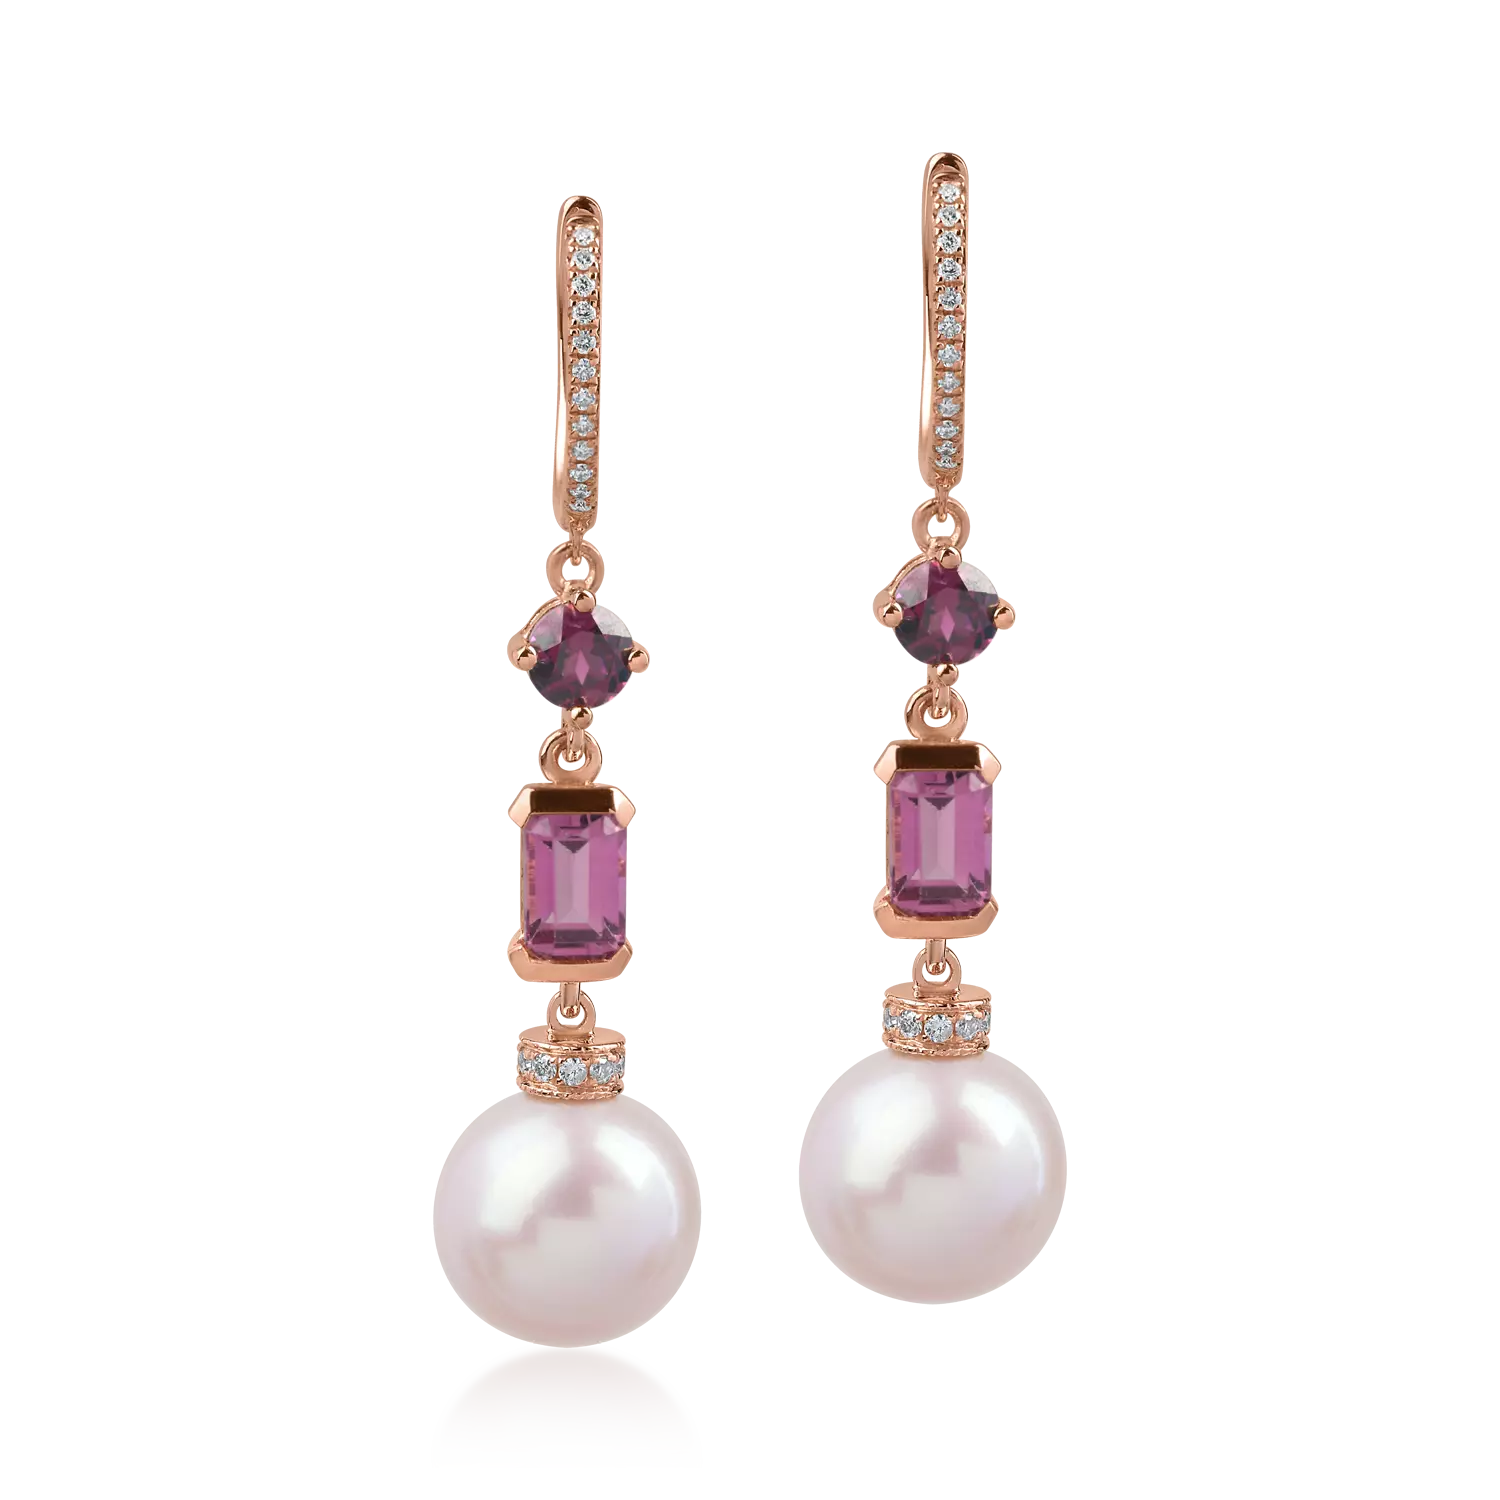 Rose gold earrings with 16.89ct precious and semi-precious stones